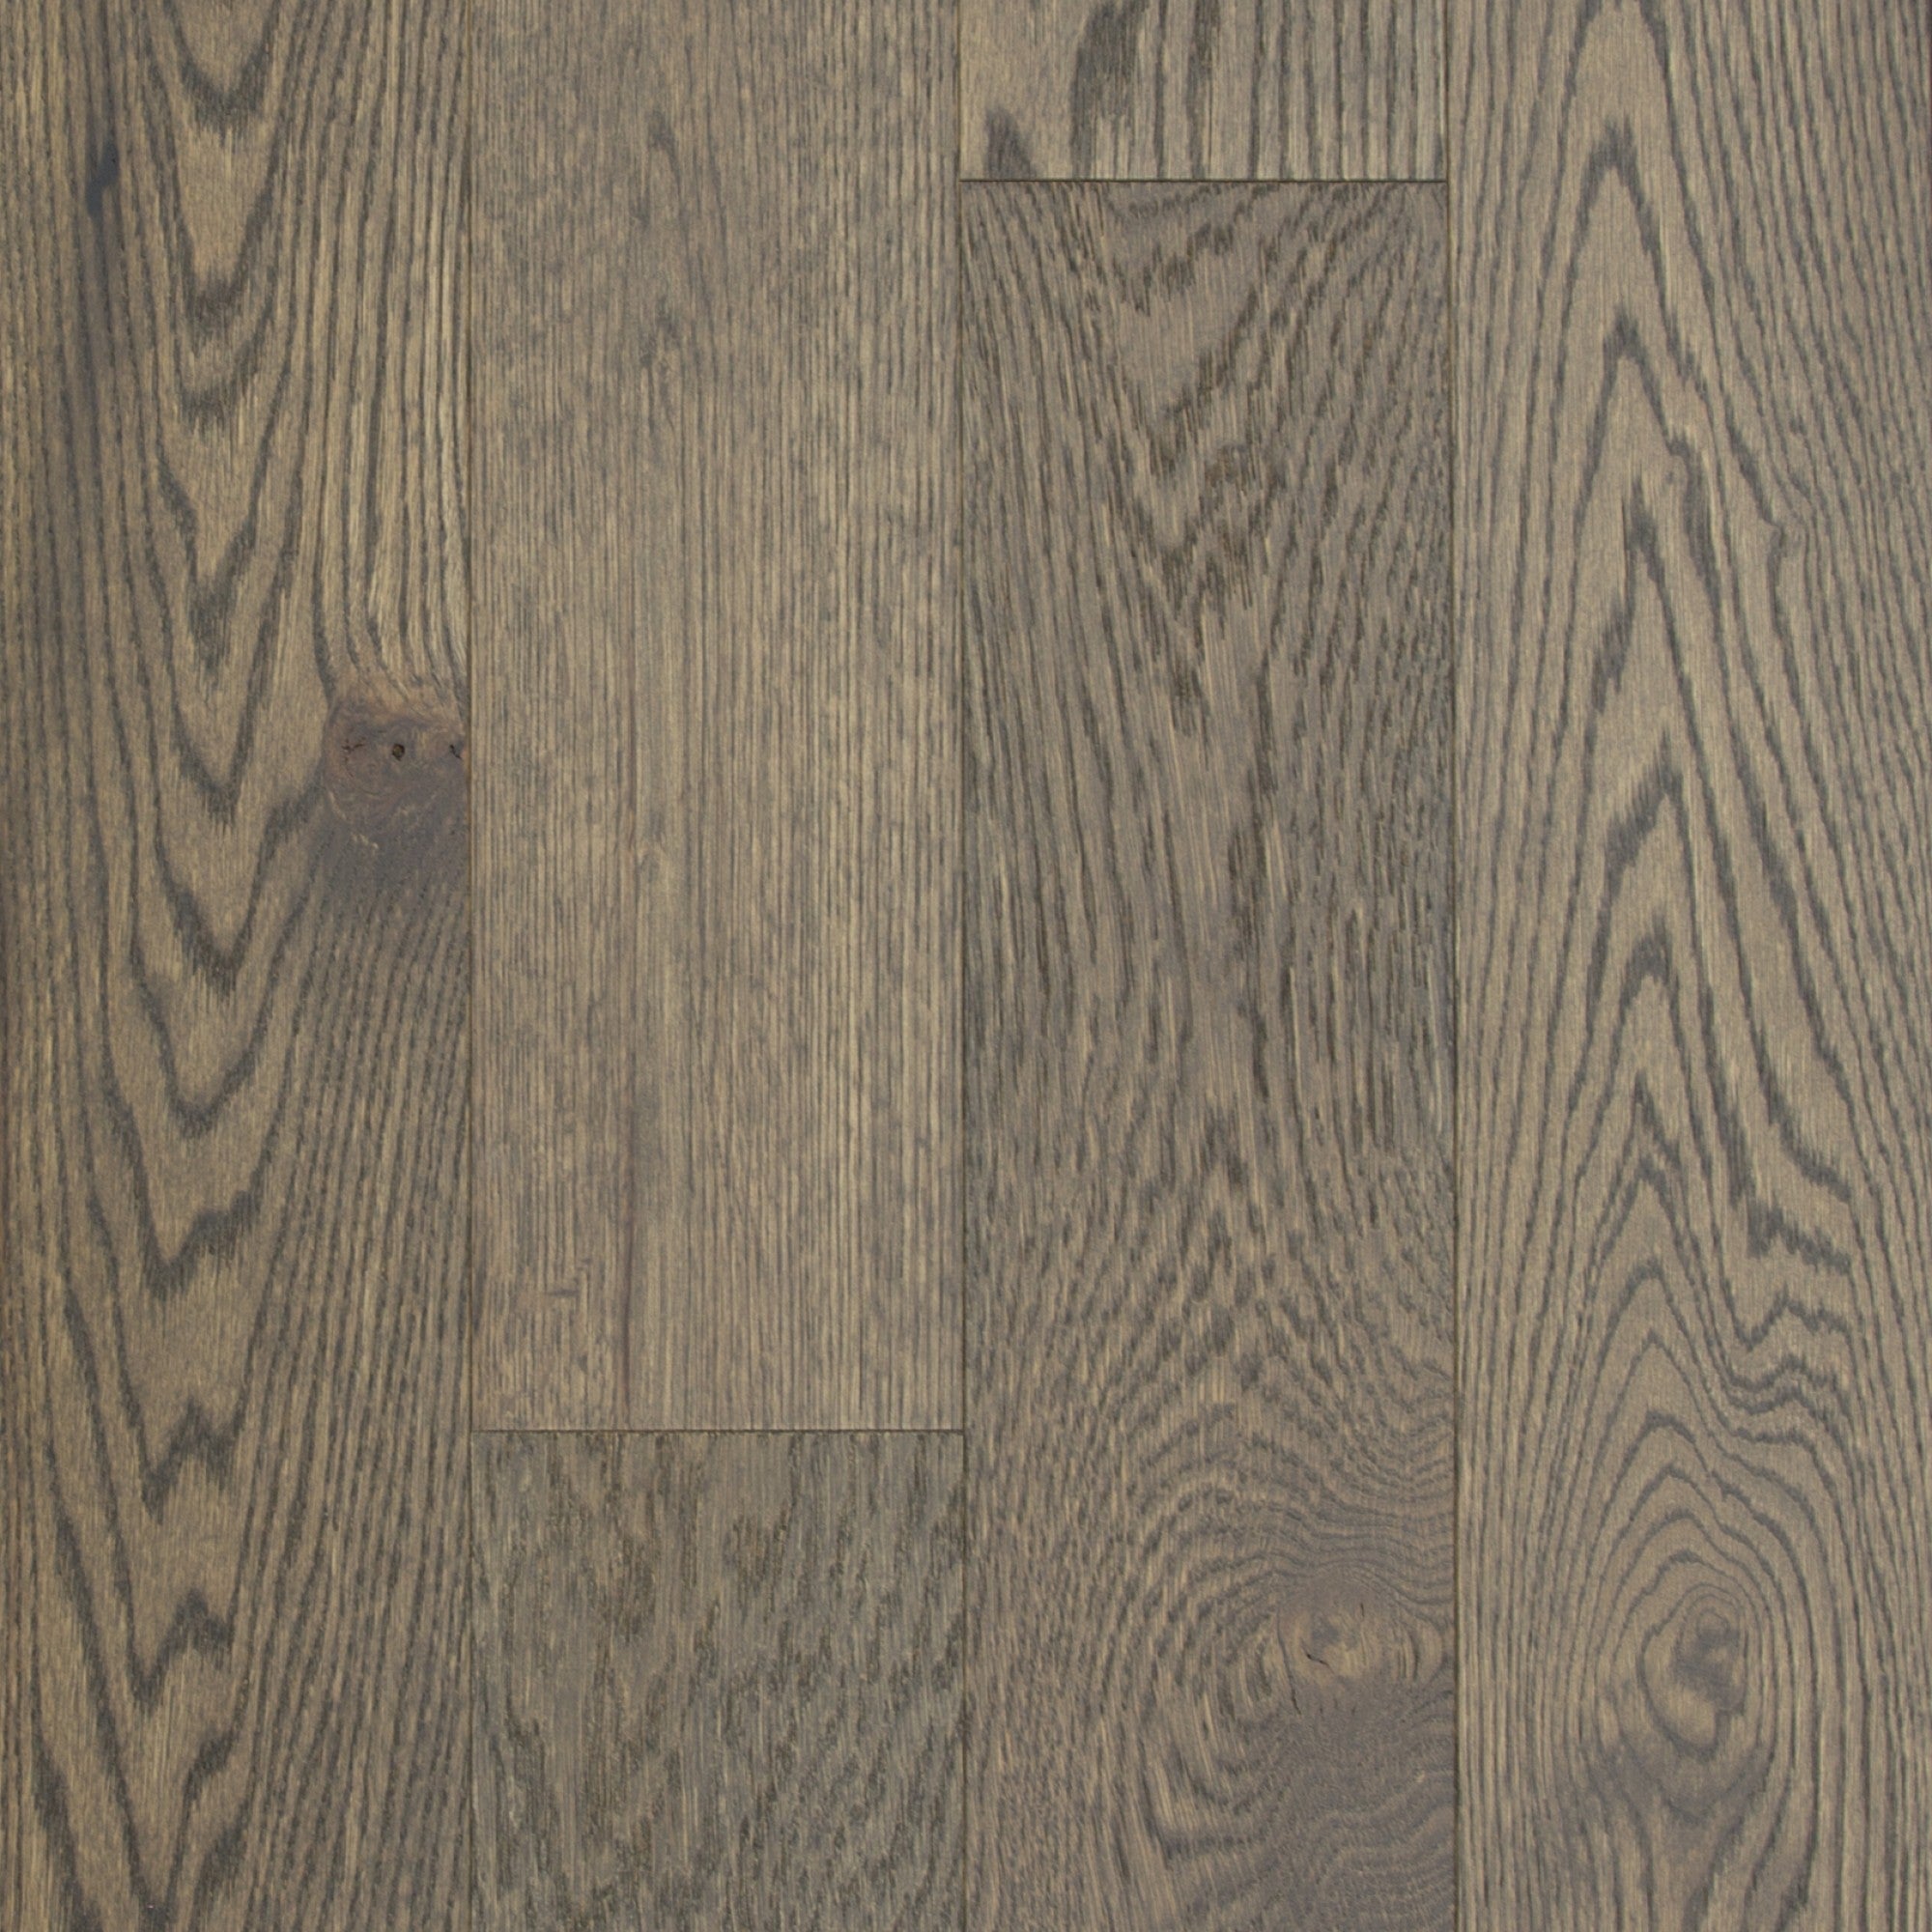 Vintage Northern Solid Sawn White Oak Zeus Wirebrushed 6 1/2" x 3/4" UVF Oil Character Grade